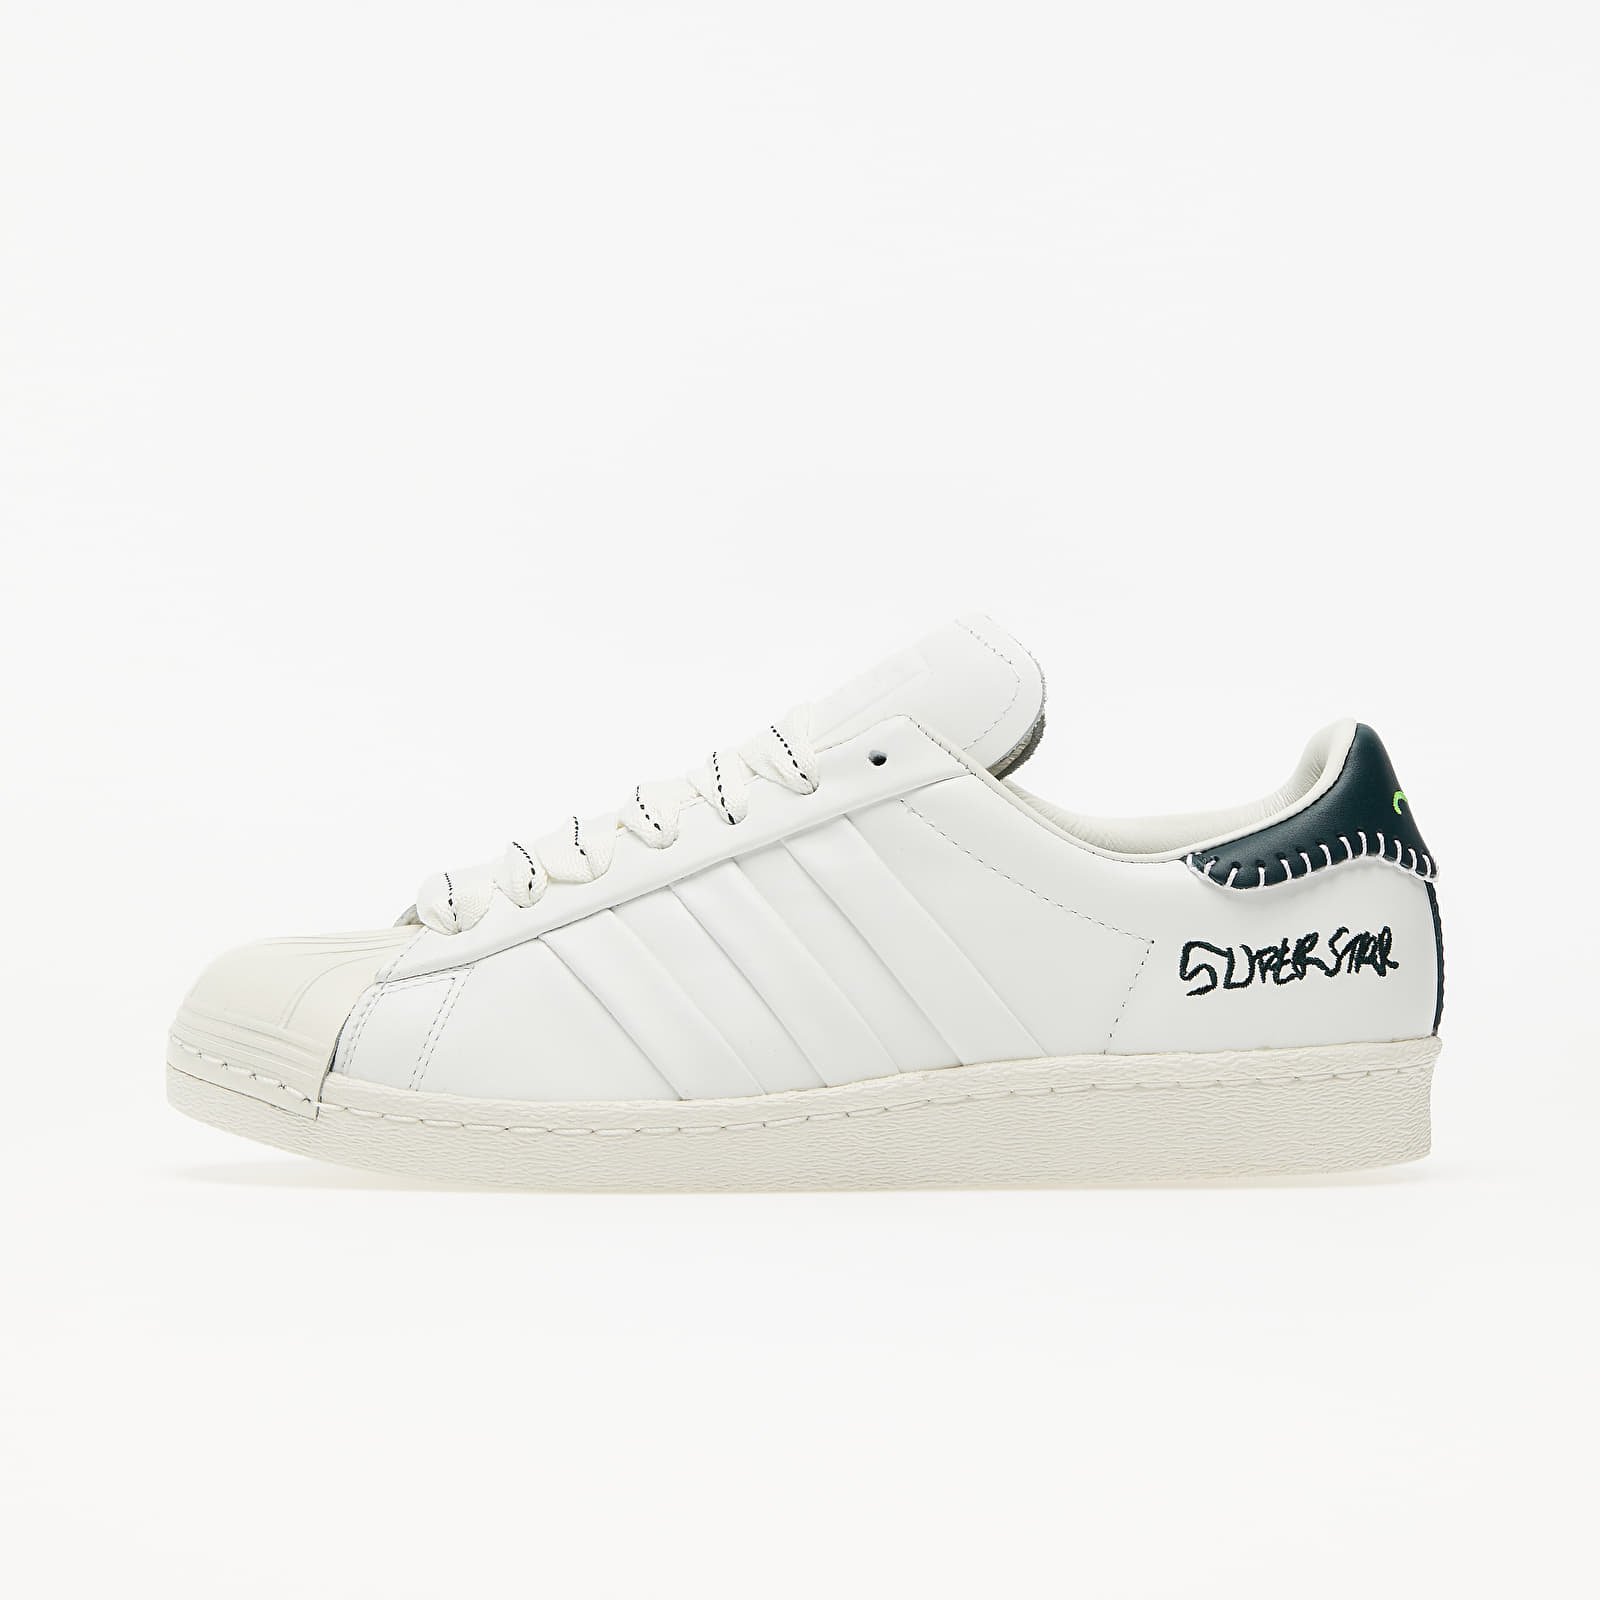 Men's shoes adidas x Jonah Hill Superstar Core White/ Green Night F17/ Off White